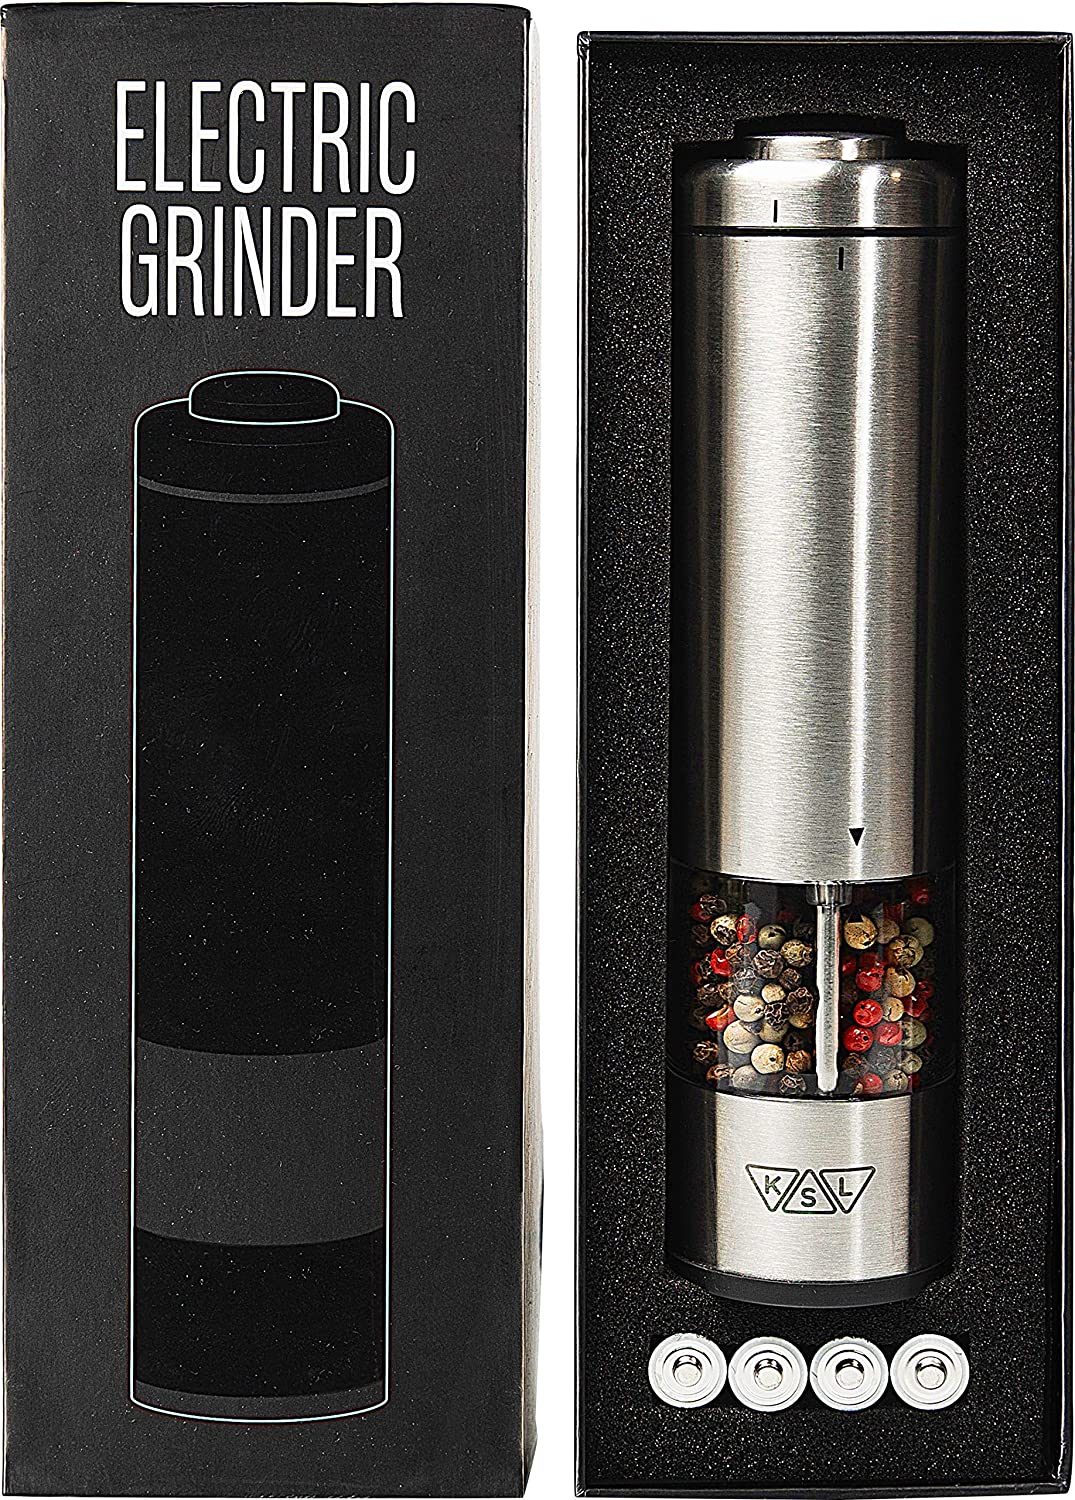 ✓ TOP 5 BEST Electric Salt and Pepper Grinders - Blackfriday and